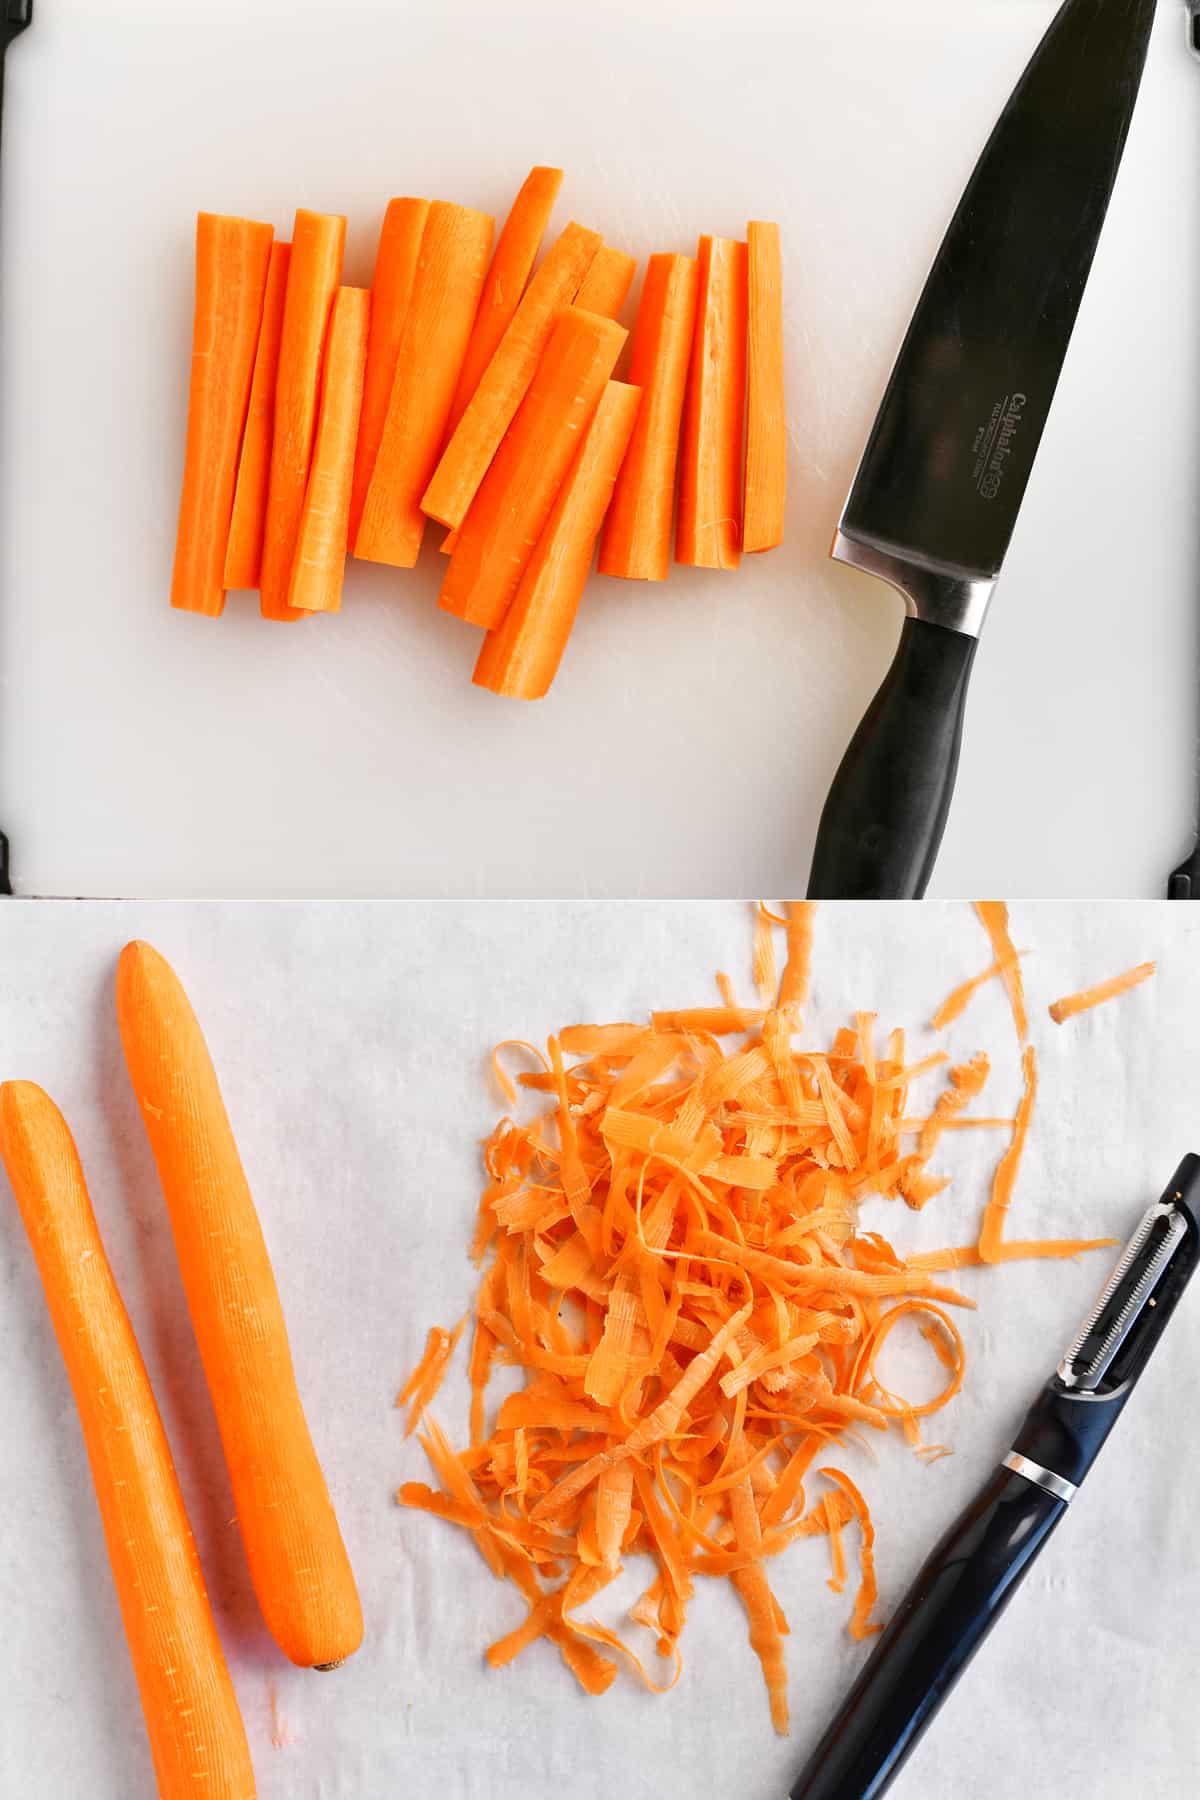 showing how to peel and cut carrots.